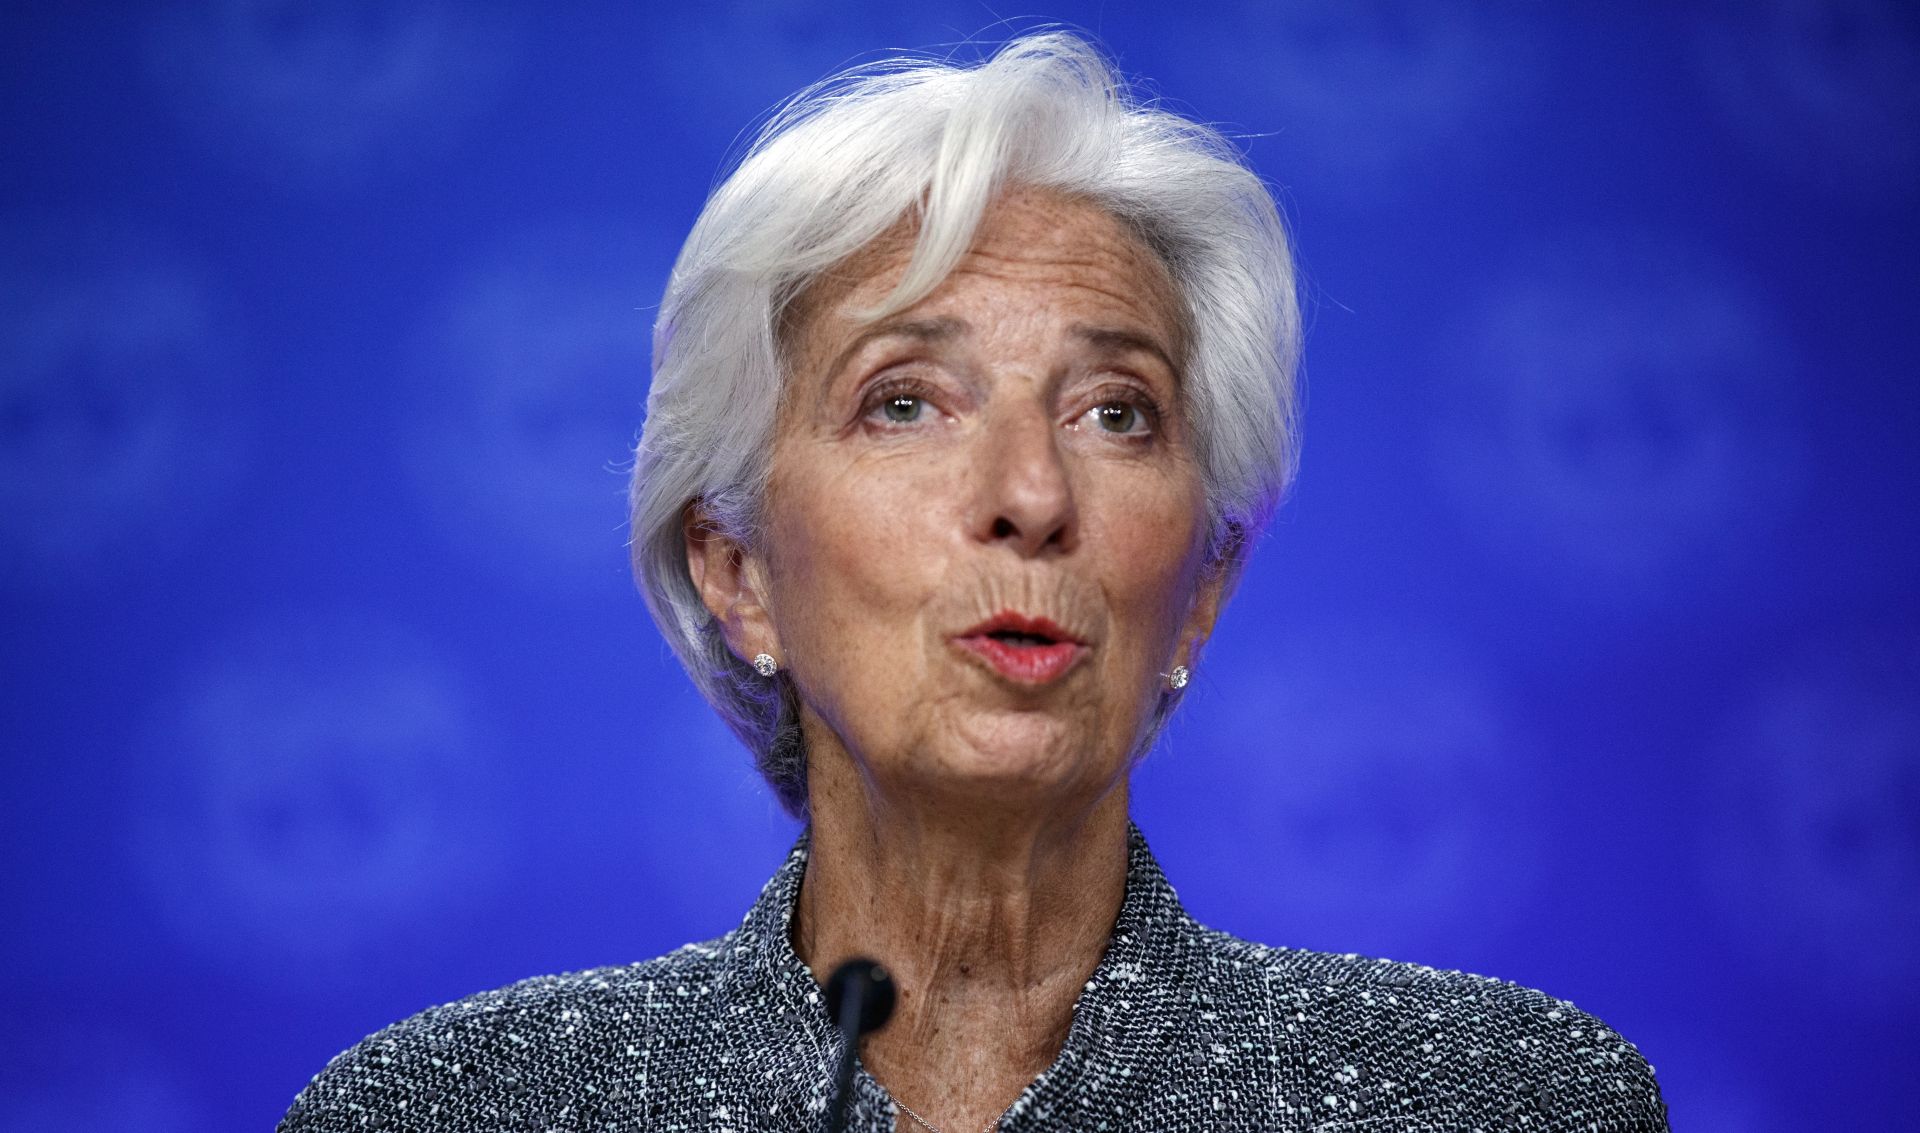 epa07690014 (FILE) - International Monetary Fund Managing Director Christine Lagarde delivers remarks during a press conference on the US economy at the International Monetary Fund headquarters in Washington, DC, USA, 06 June 2019 (reissued 02 July 2019). Reports on 02 July 2019 state French Emmanuel Macron has proposed the current chief of the International Monetary Fund (IMF), Christine Lagarde from France, as head of the European Central Bank (ECB) as European Union leaders continue their discussions in Brussels of how to fill the five important EU posts.  EPA/SHAWN THEW